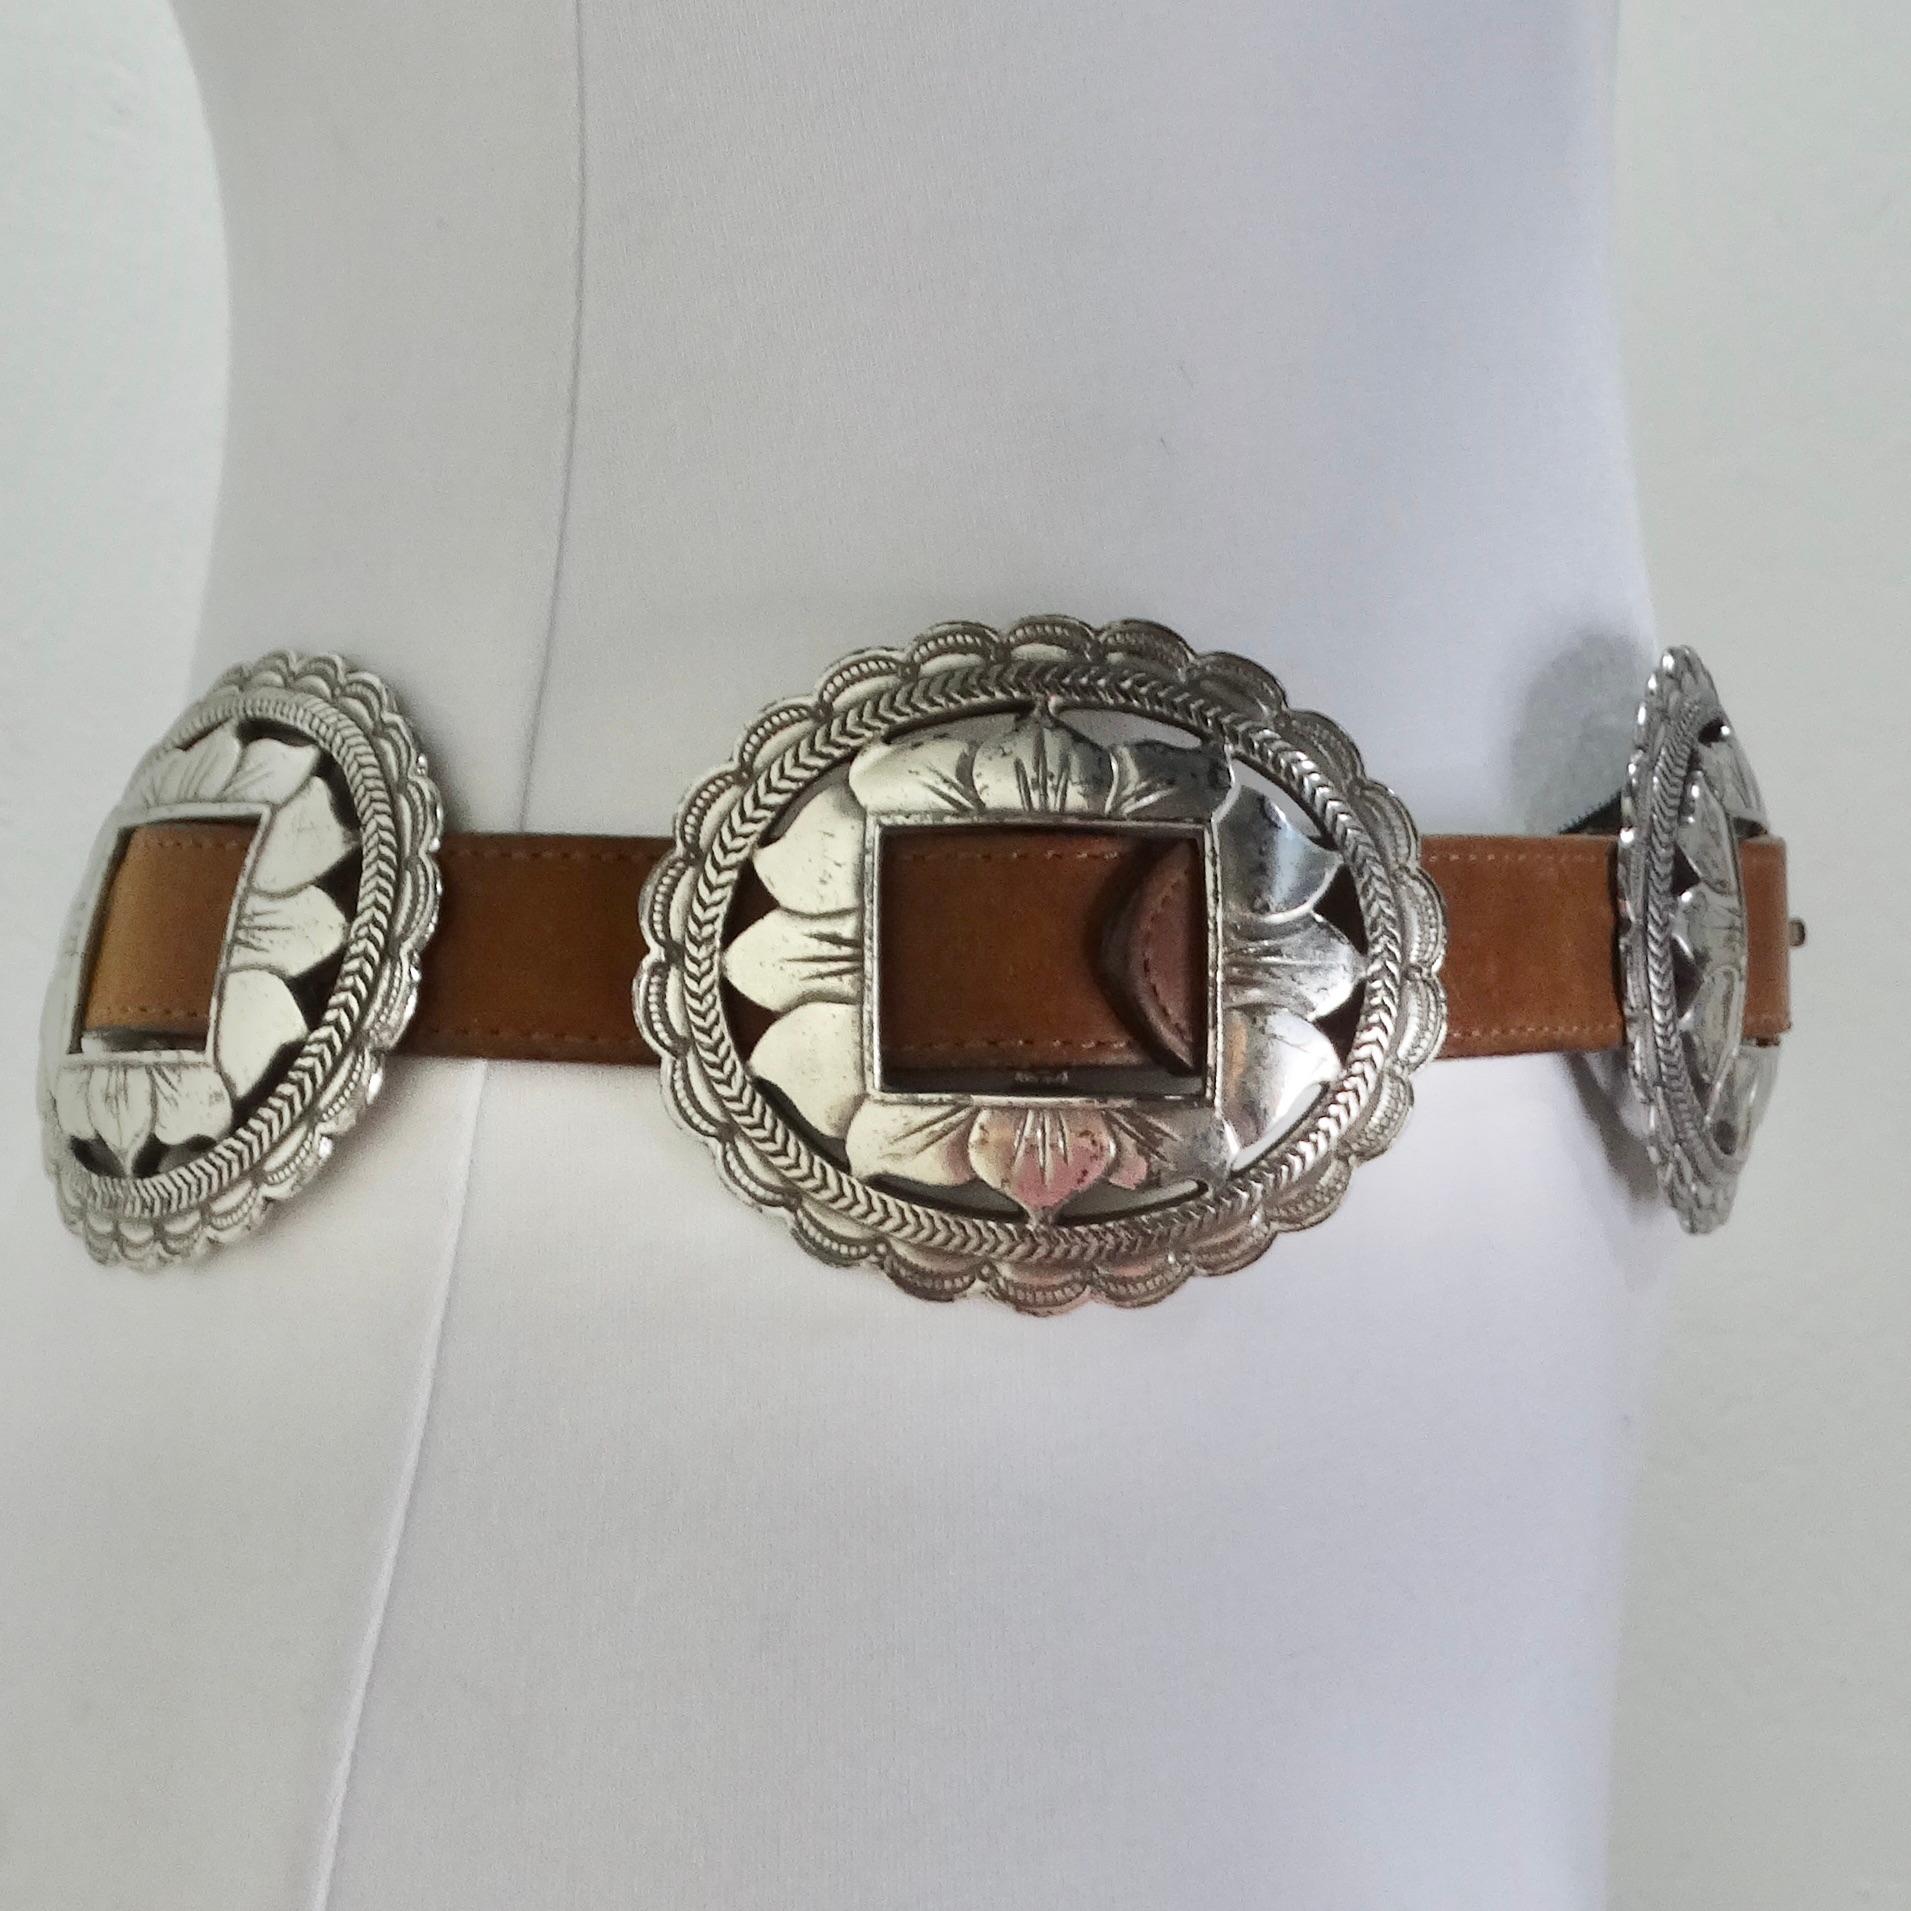 1990s Brown Leather Silver Tone Belt In Good Condition For Sale In Scottsdale, AZ